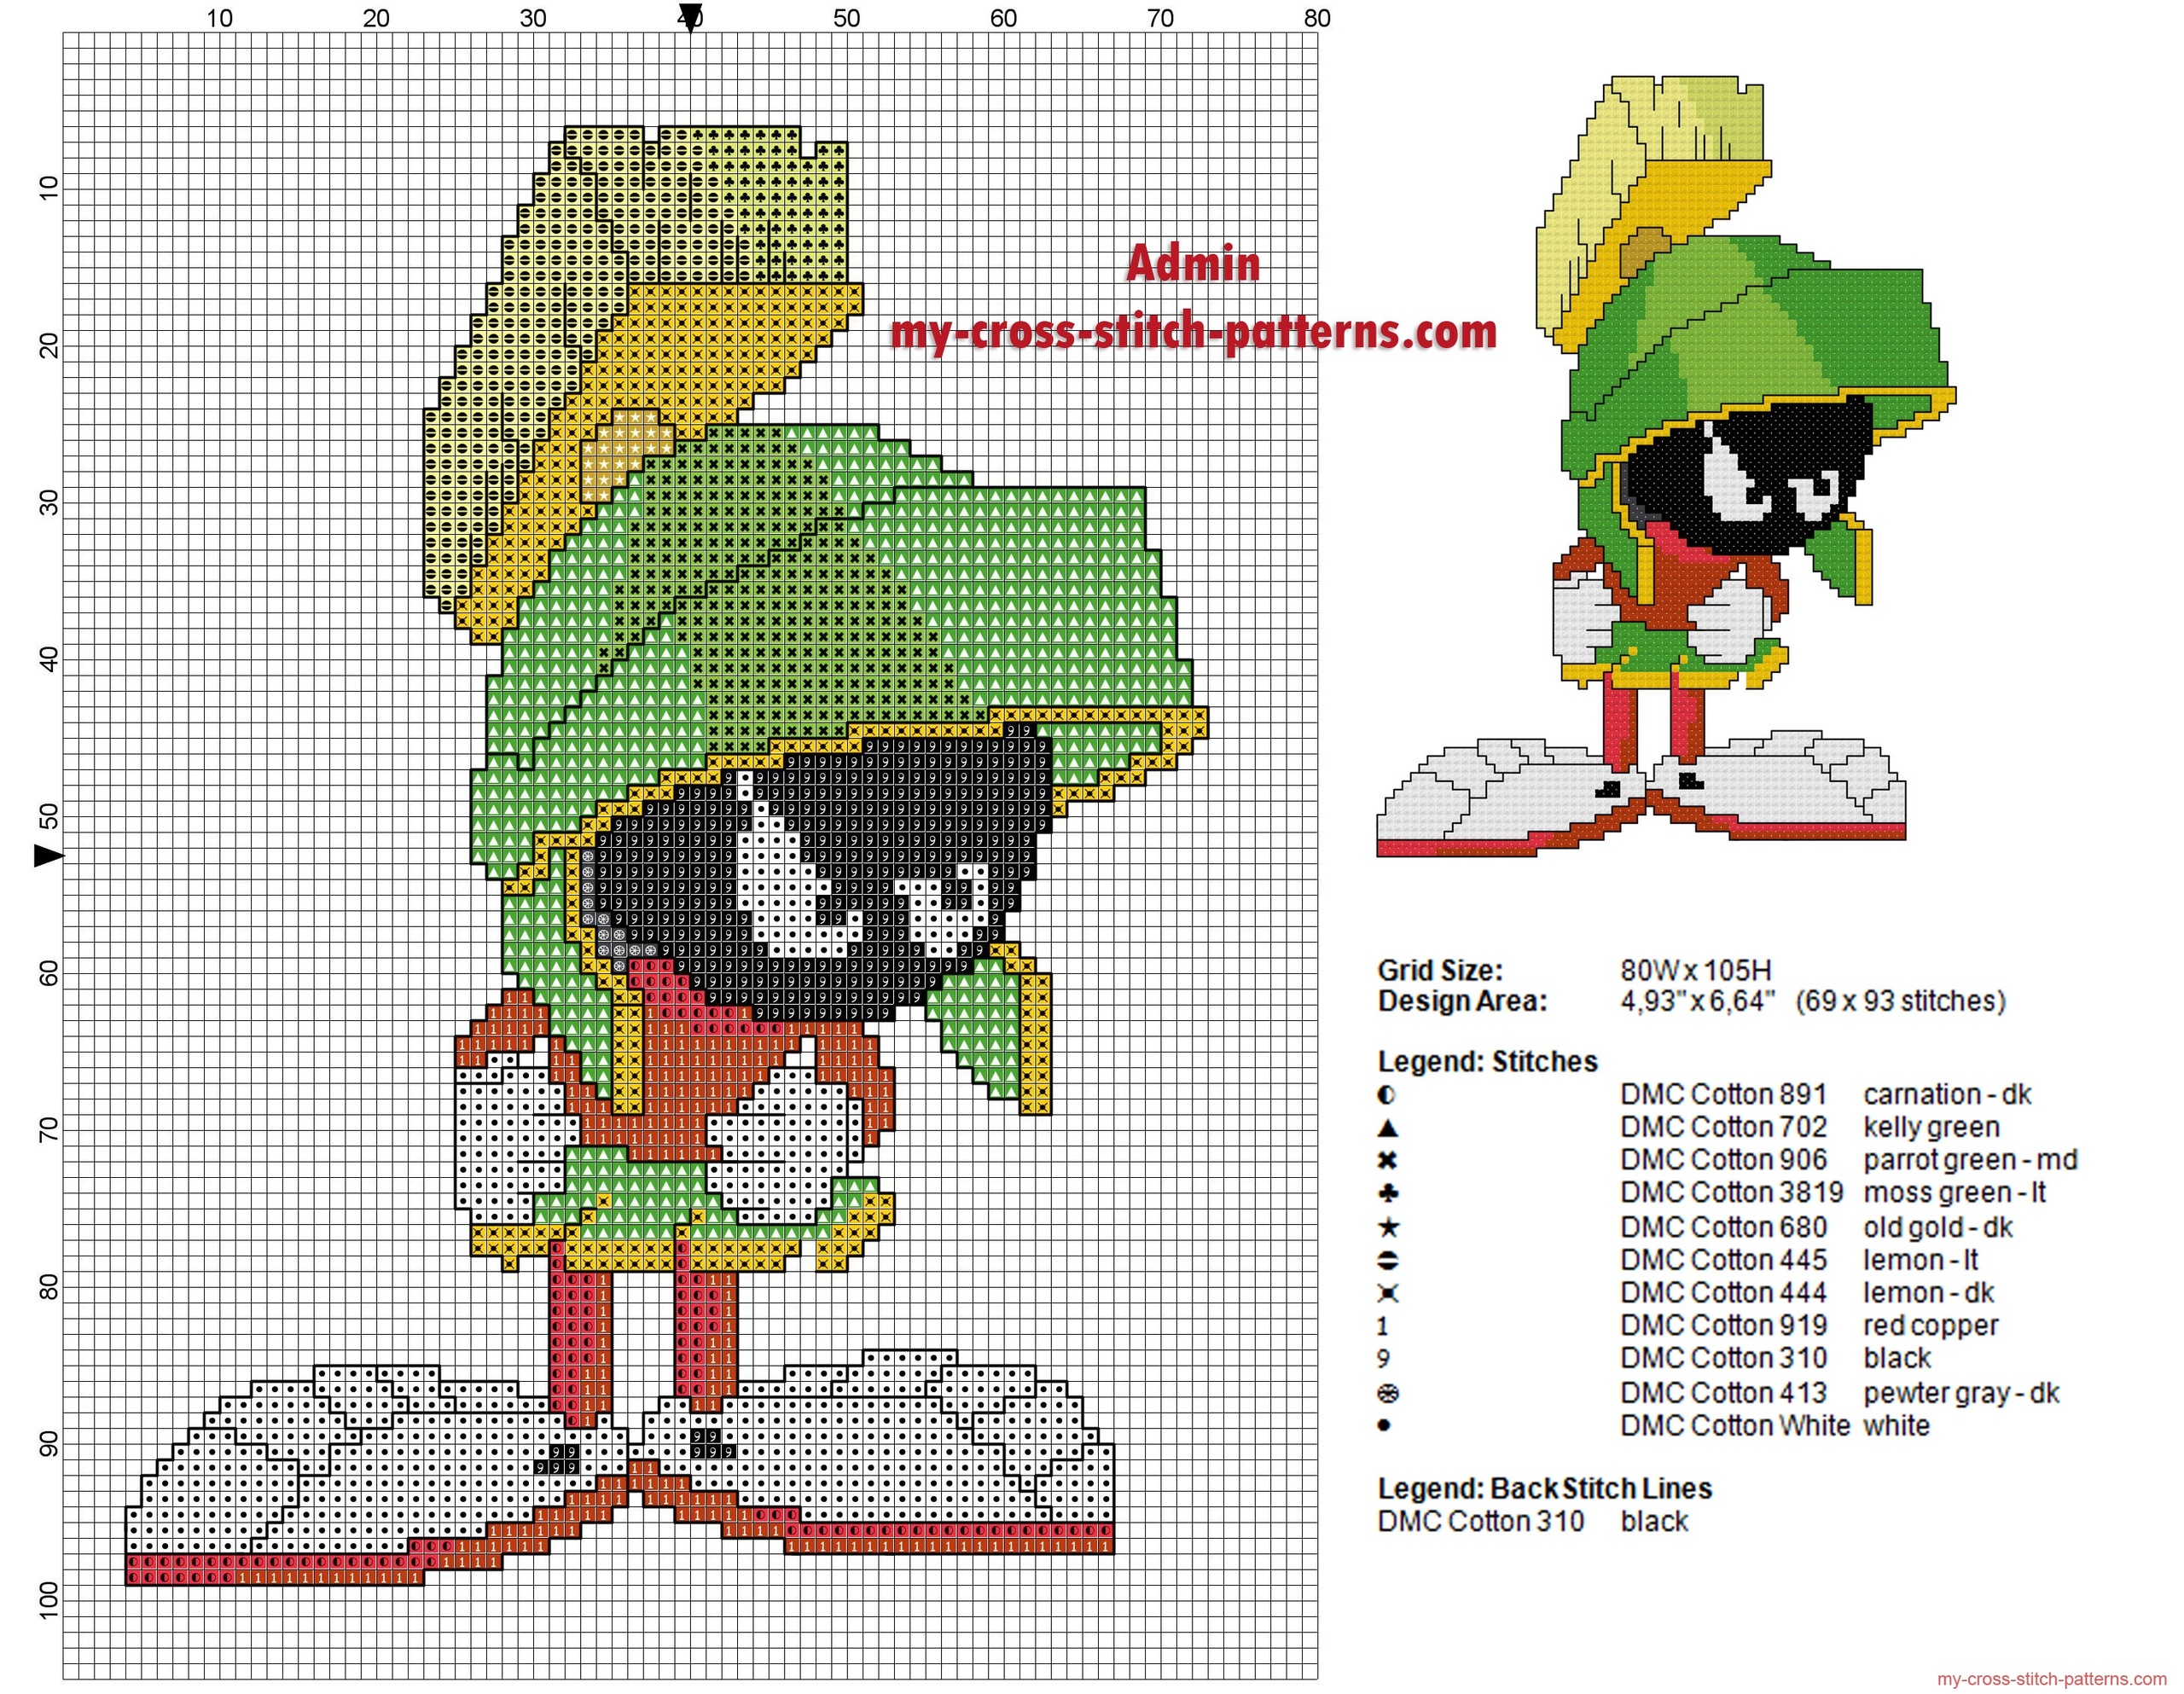 free_cross_stitch_pattern_marvin_the_martian_looney_tunes_uses_back_stitch